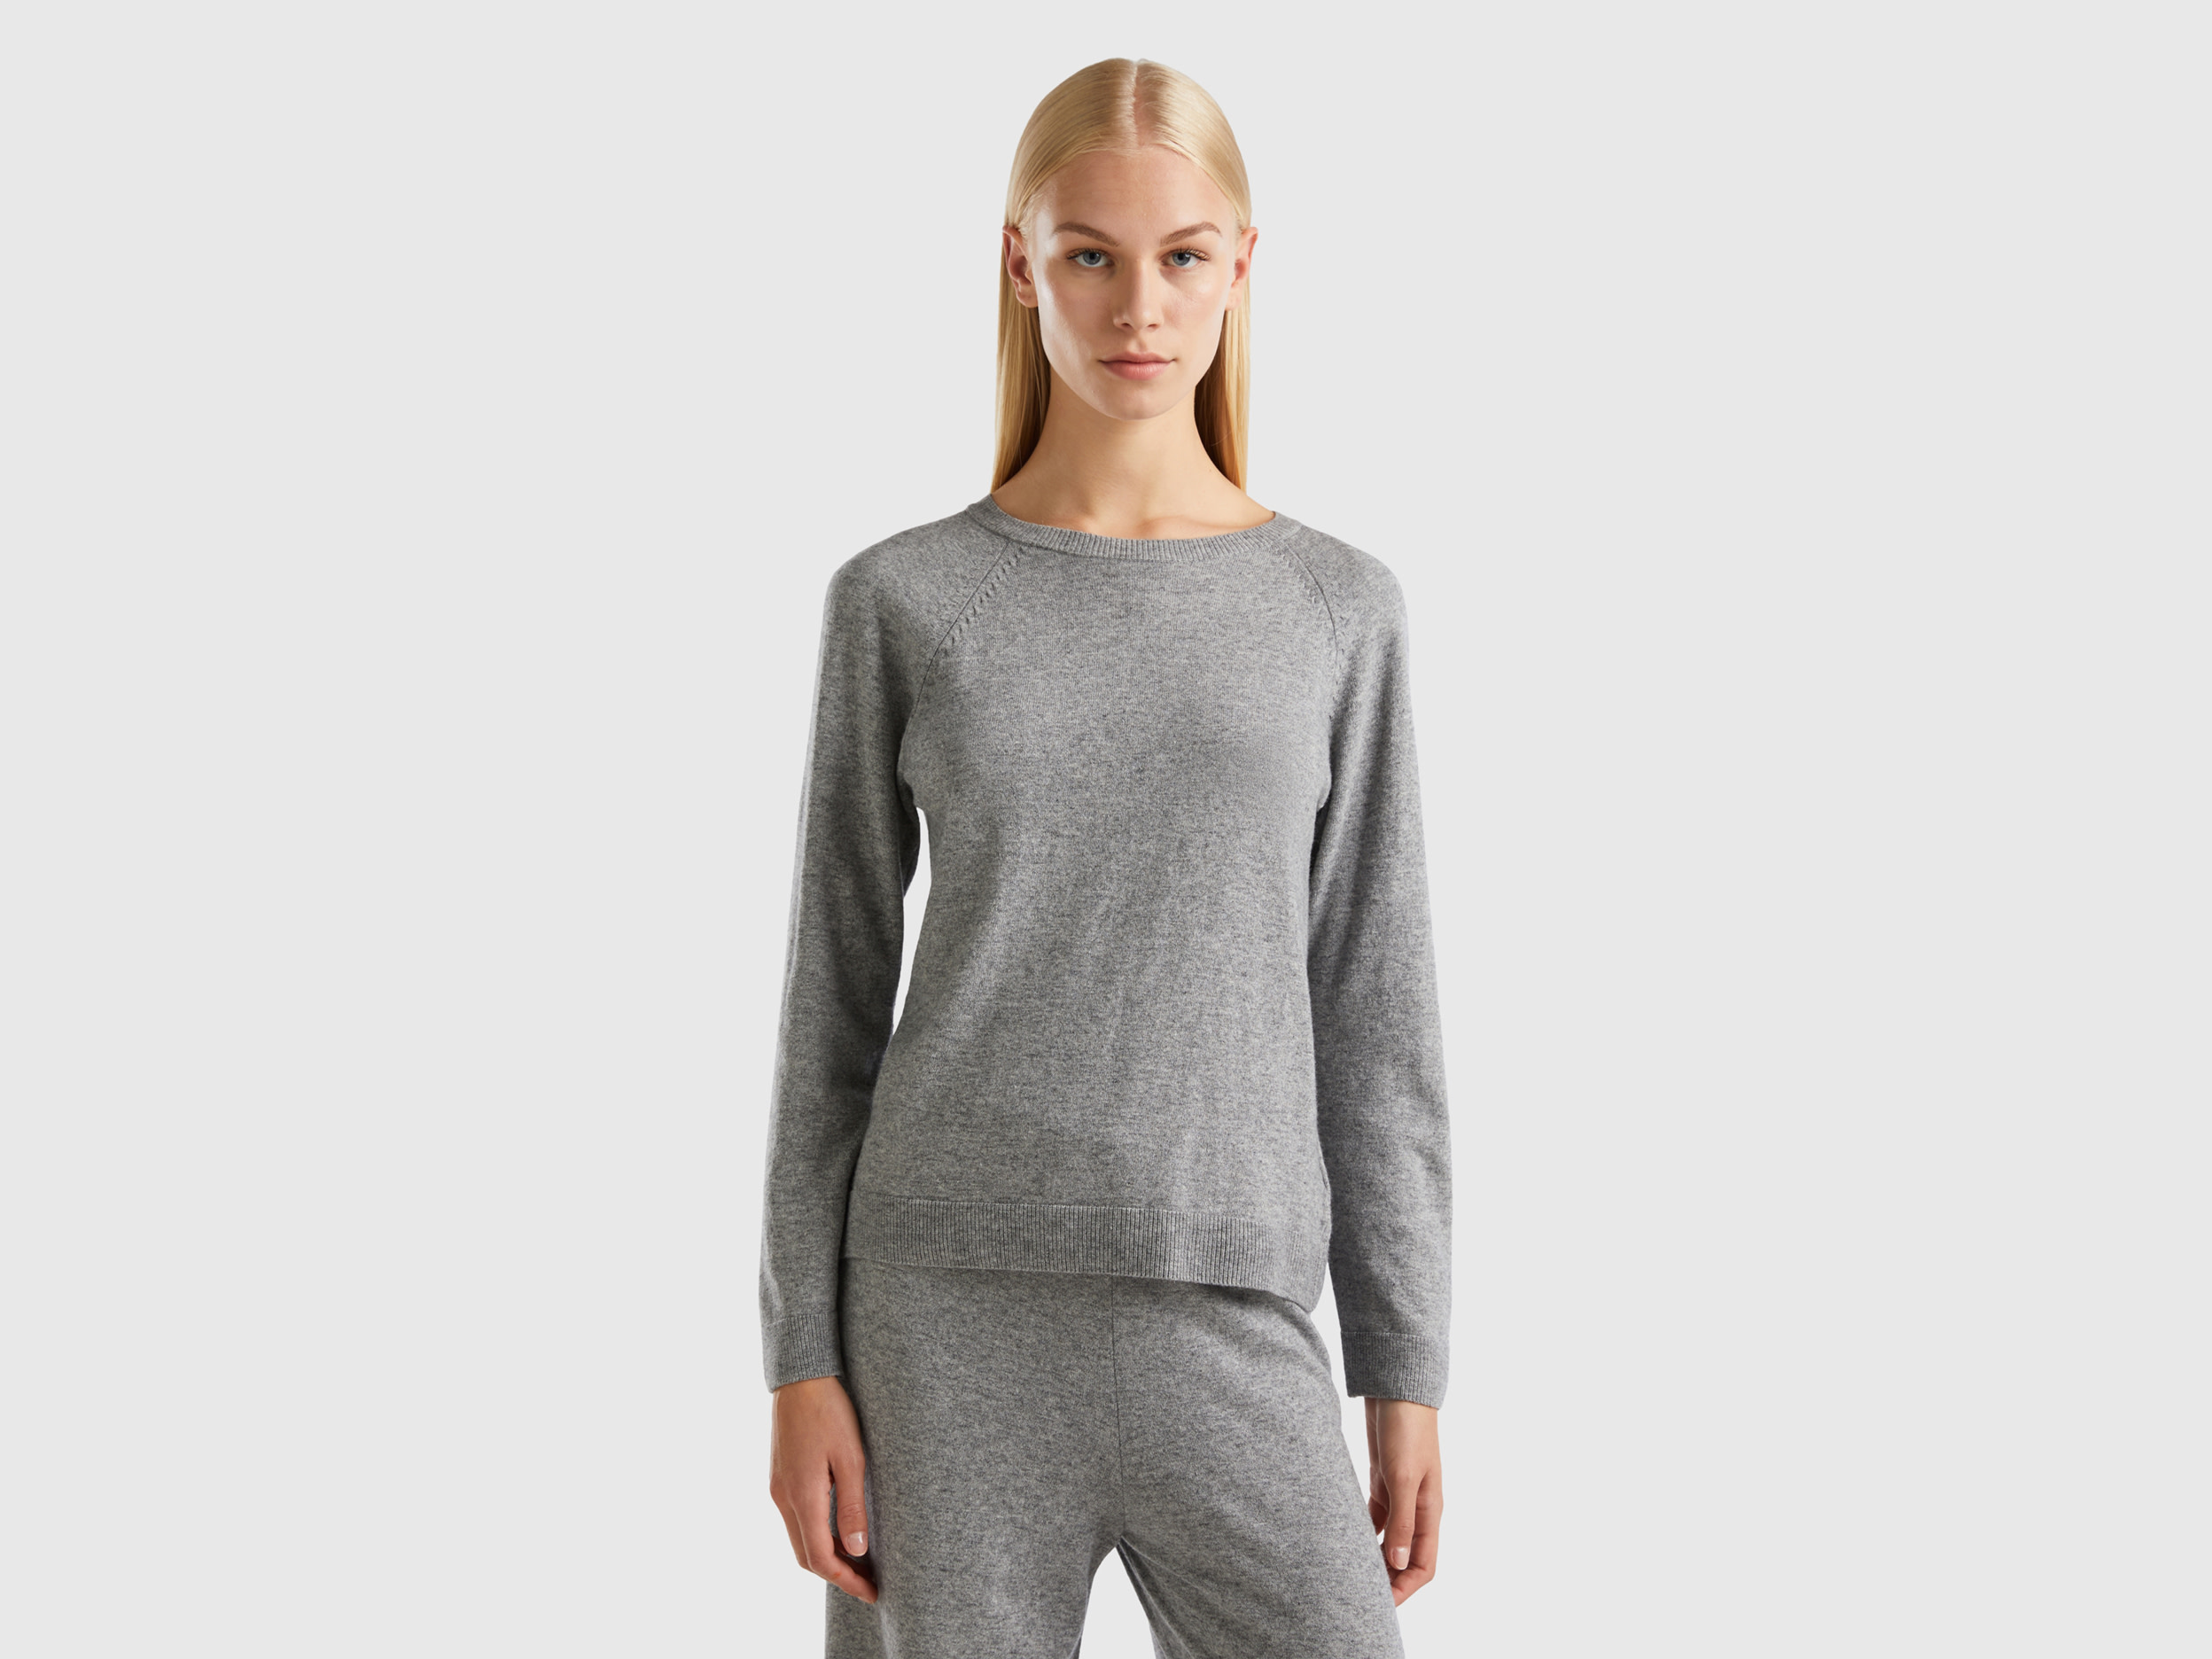 Benetton, Gray Crew Neck Sweater In Cashmere And Wool Blend, size S, Light Gray, Women